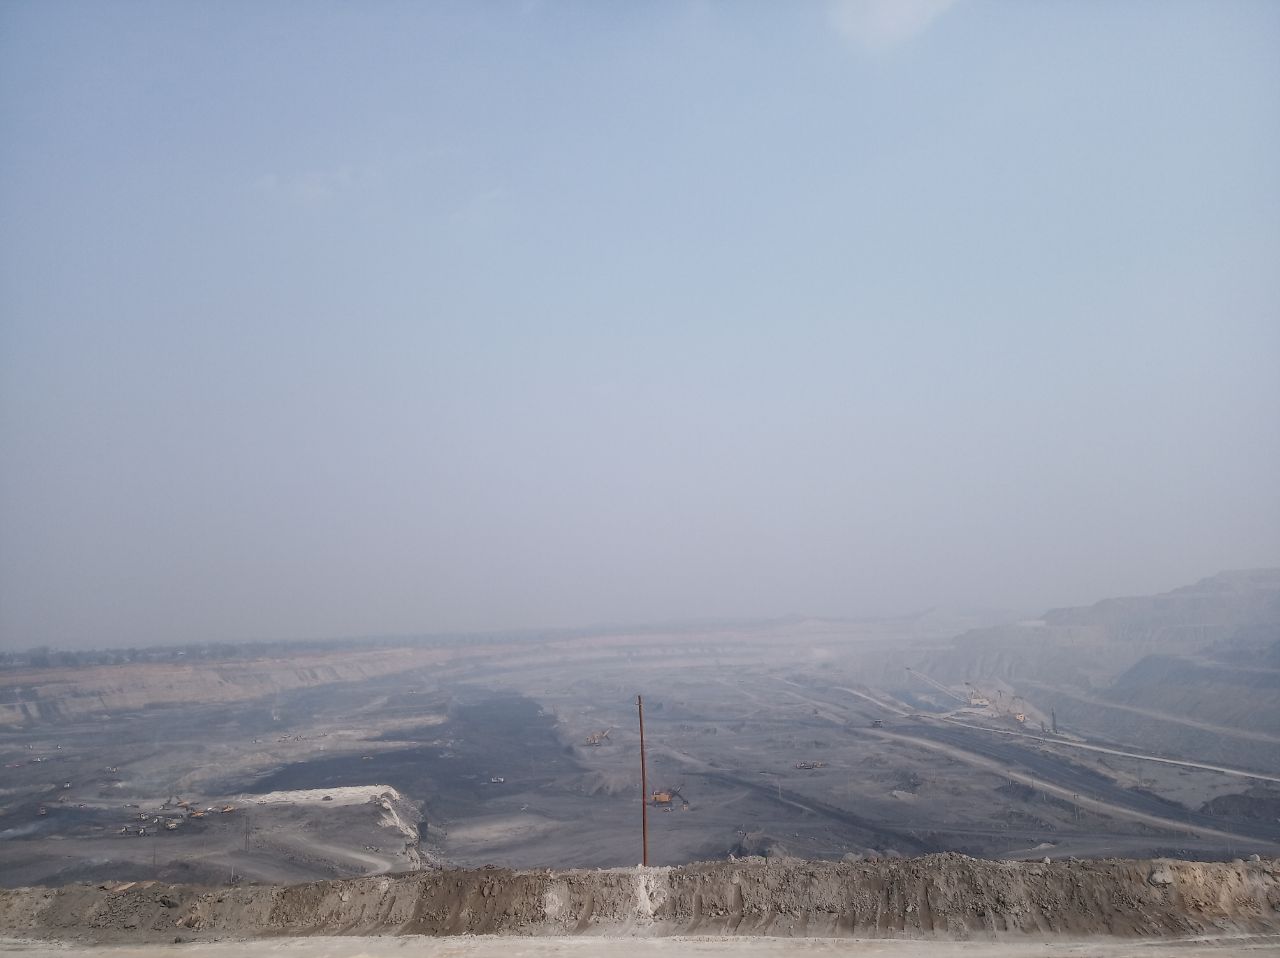 Two more coal mines will be started soon in Singrauli